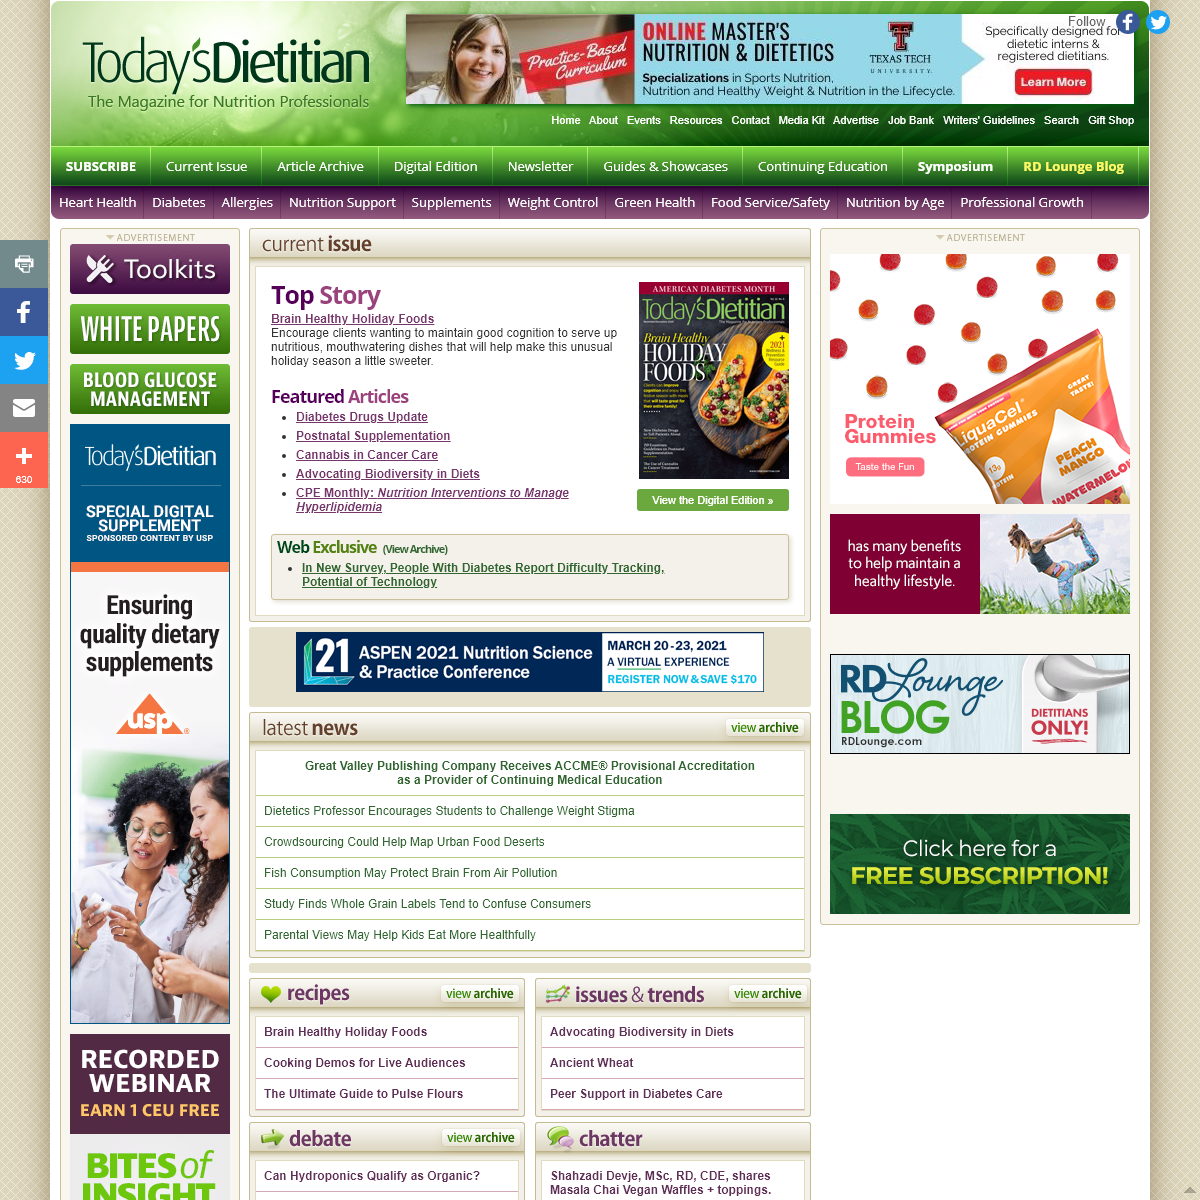 A complete backup of todaysdietitian.com